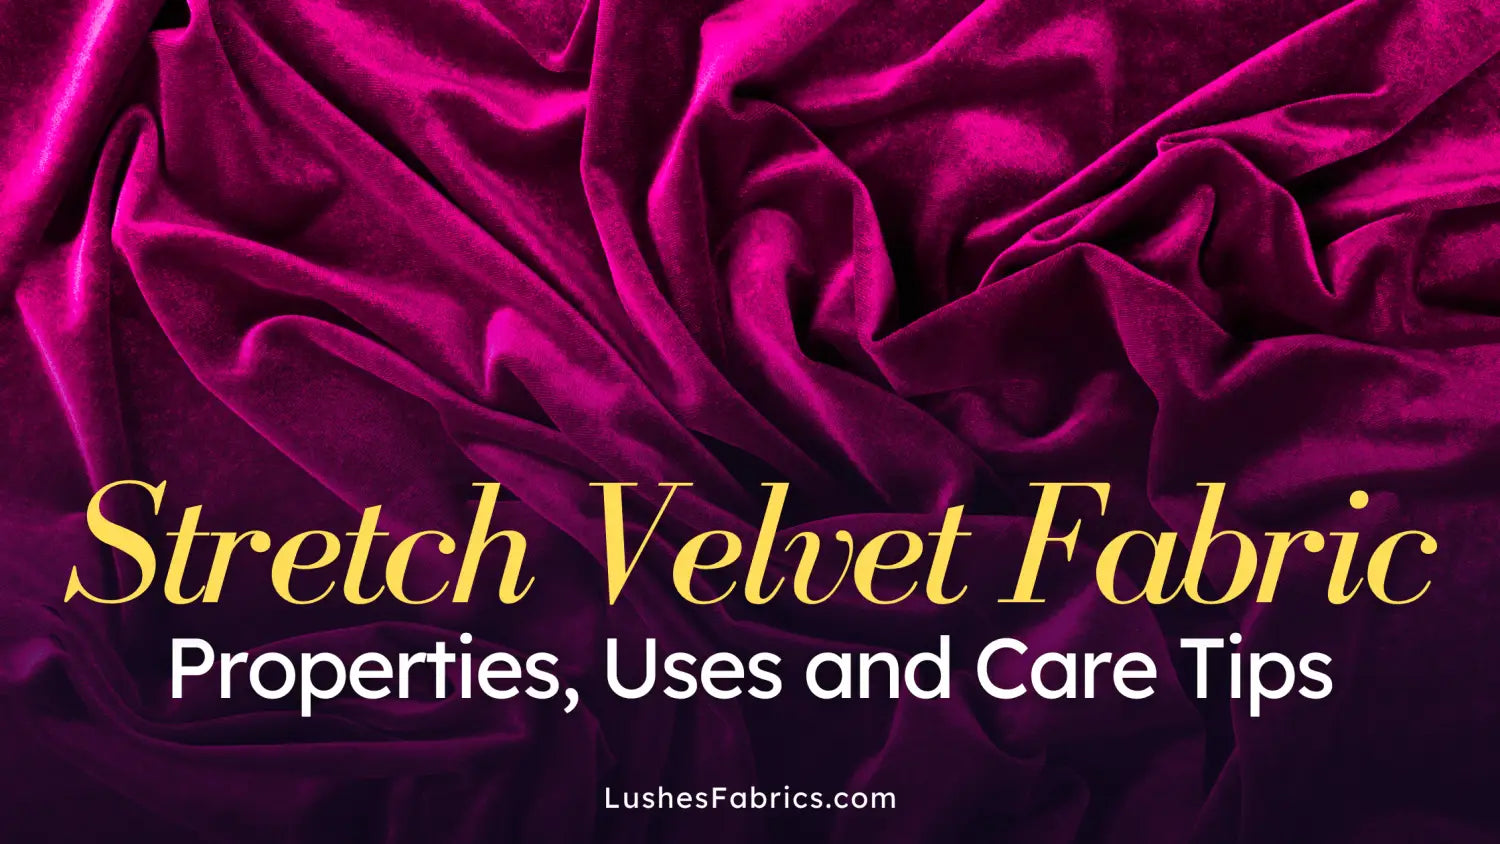 The Ultimate Guide to Stretch Velvet Fabric: Properties, Uses and